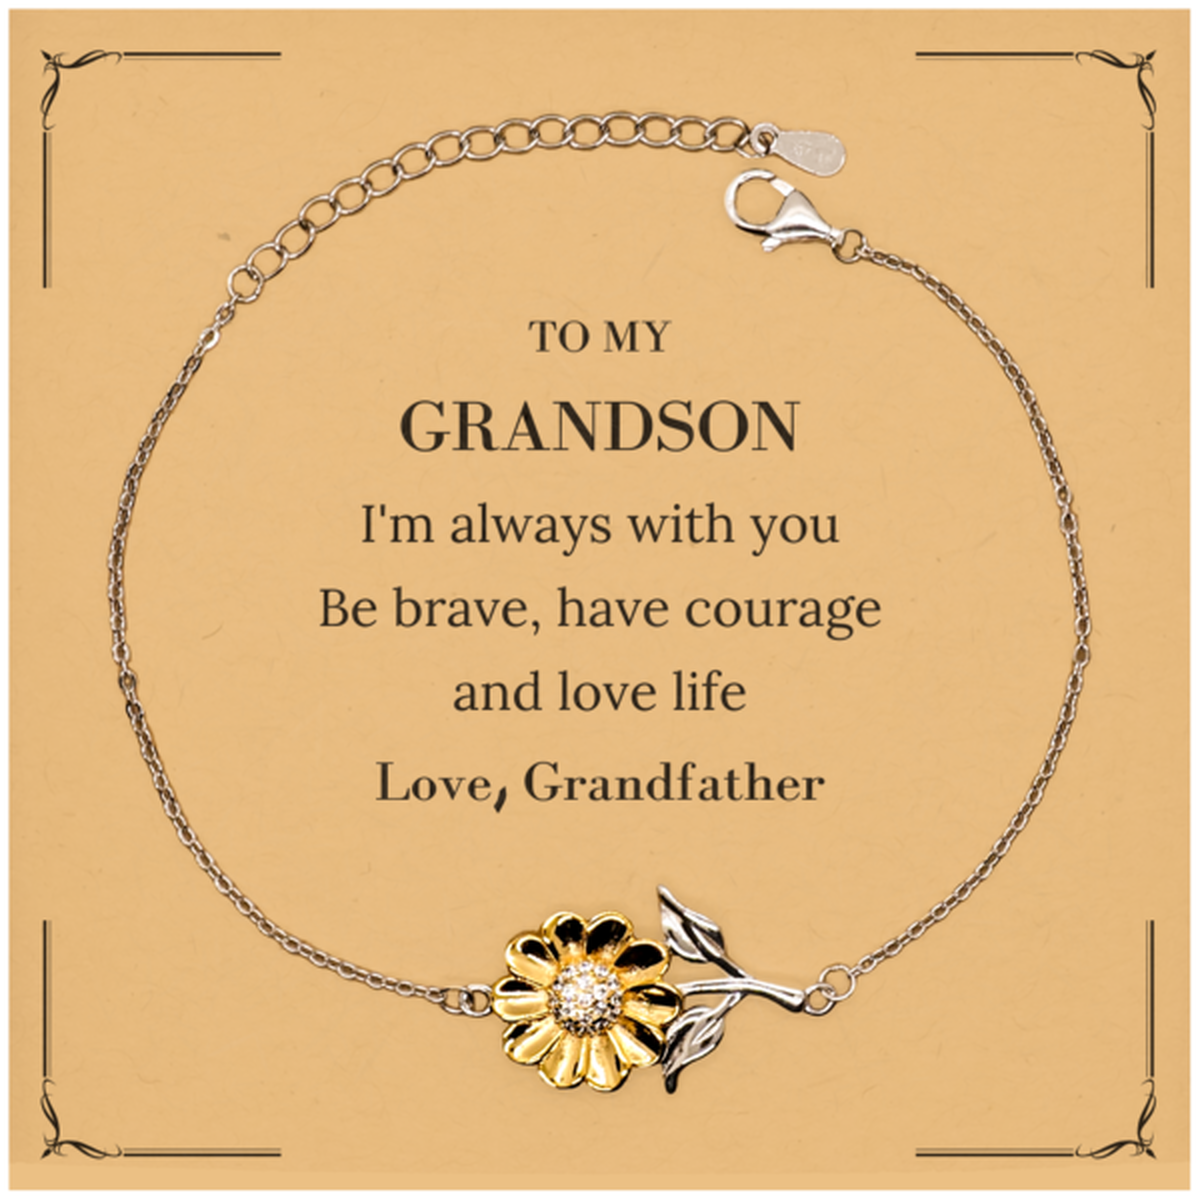 To My Grandson Gifts from Grandfather, Unique Sunflower Bracelet Inspirational Christmas Birthday Graduation Gifts for Grandson I'm always with you. Be brave, have courage and love life. Love, Grandfather